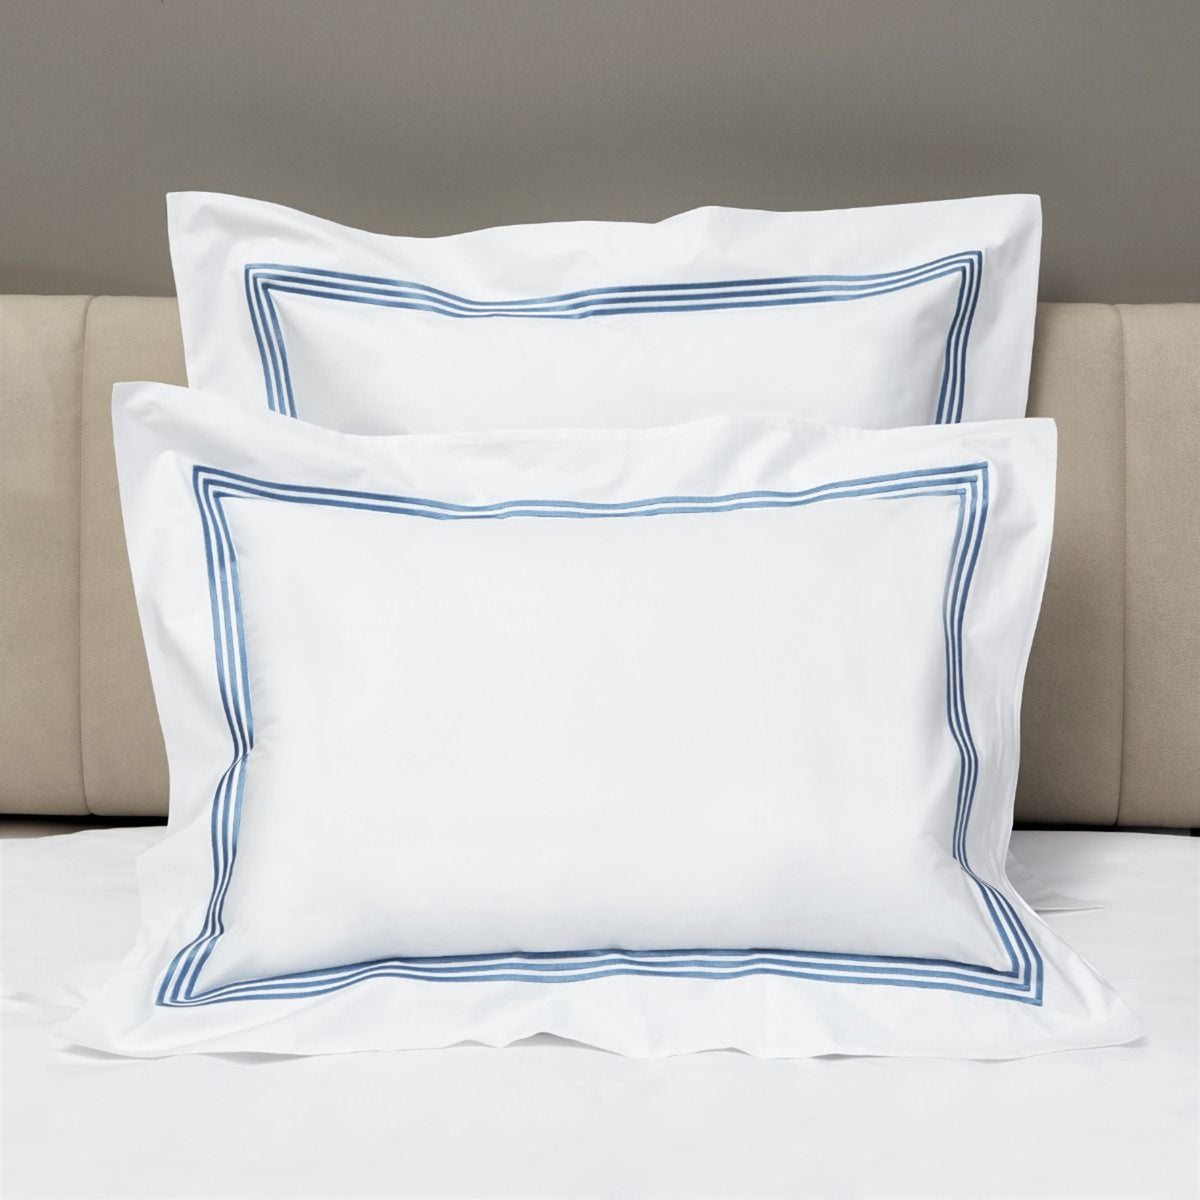 Shams of Signoria Platinum Percale Bedding in White/Airforce Blue Color